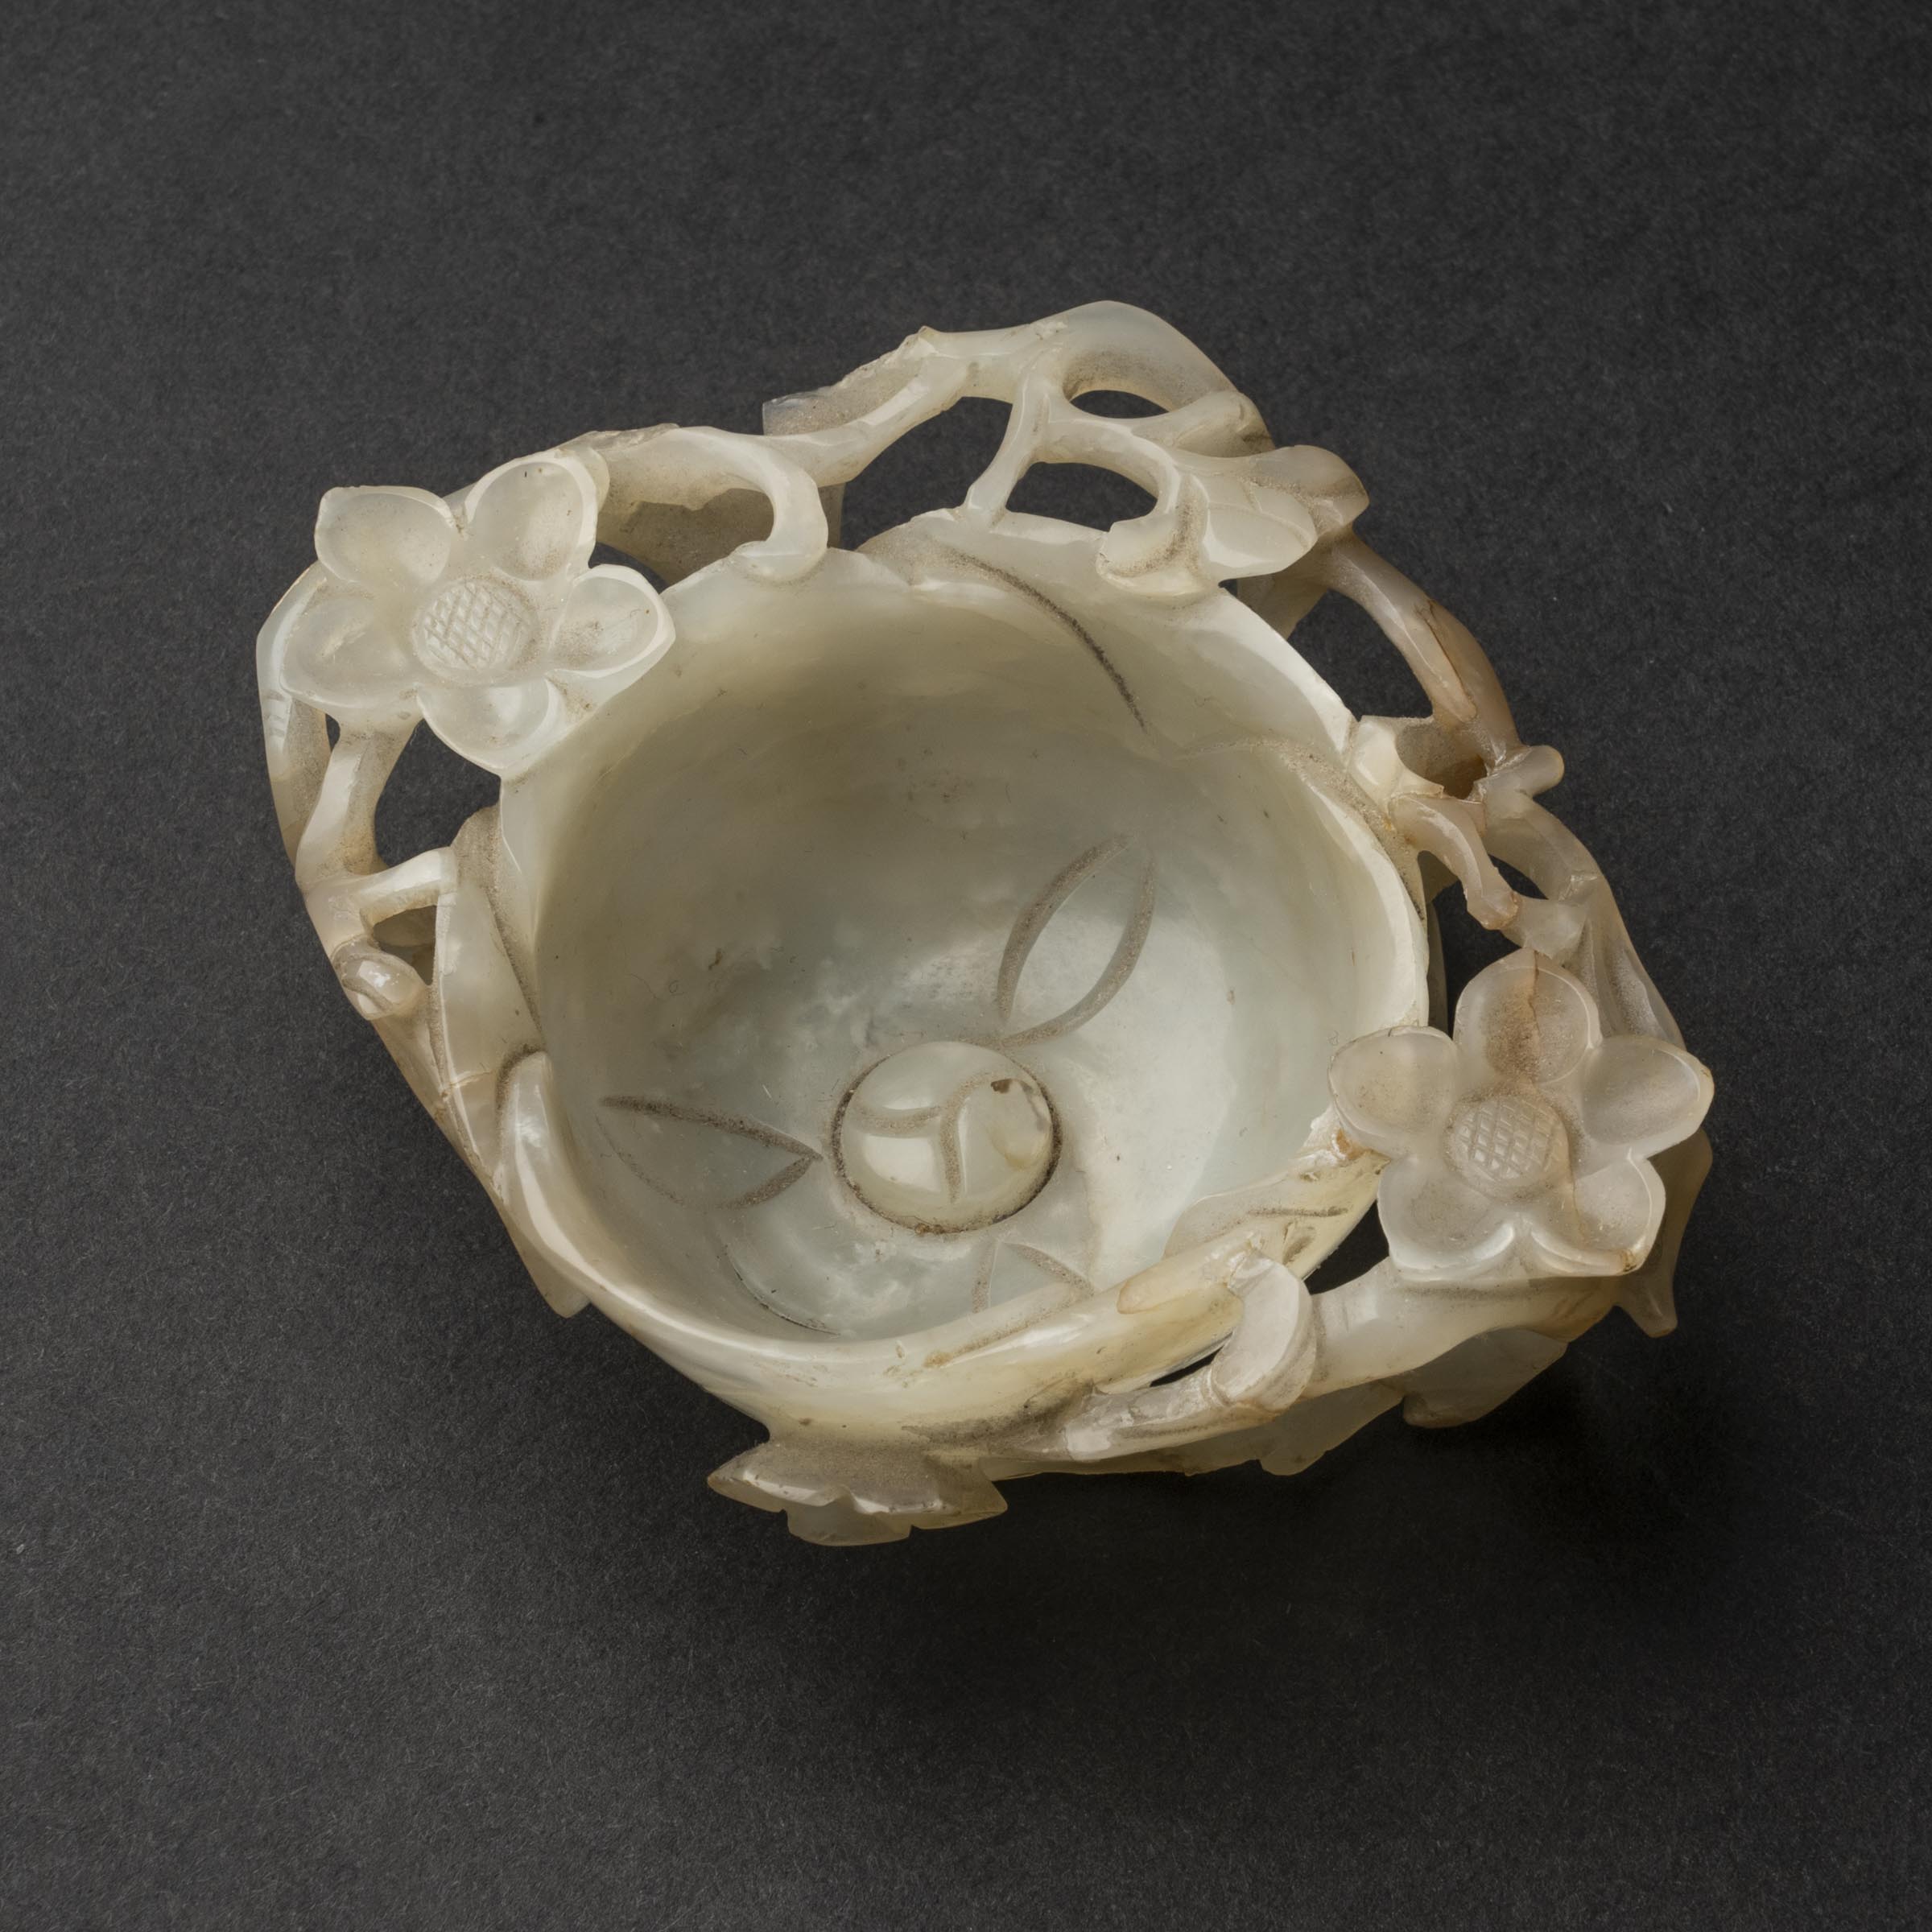 A White Jade Lotus-Form Cup, Ming Dynasty (1368-1644)